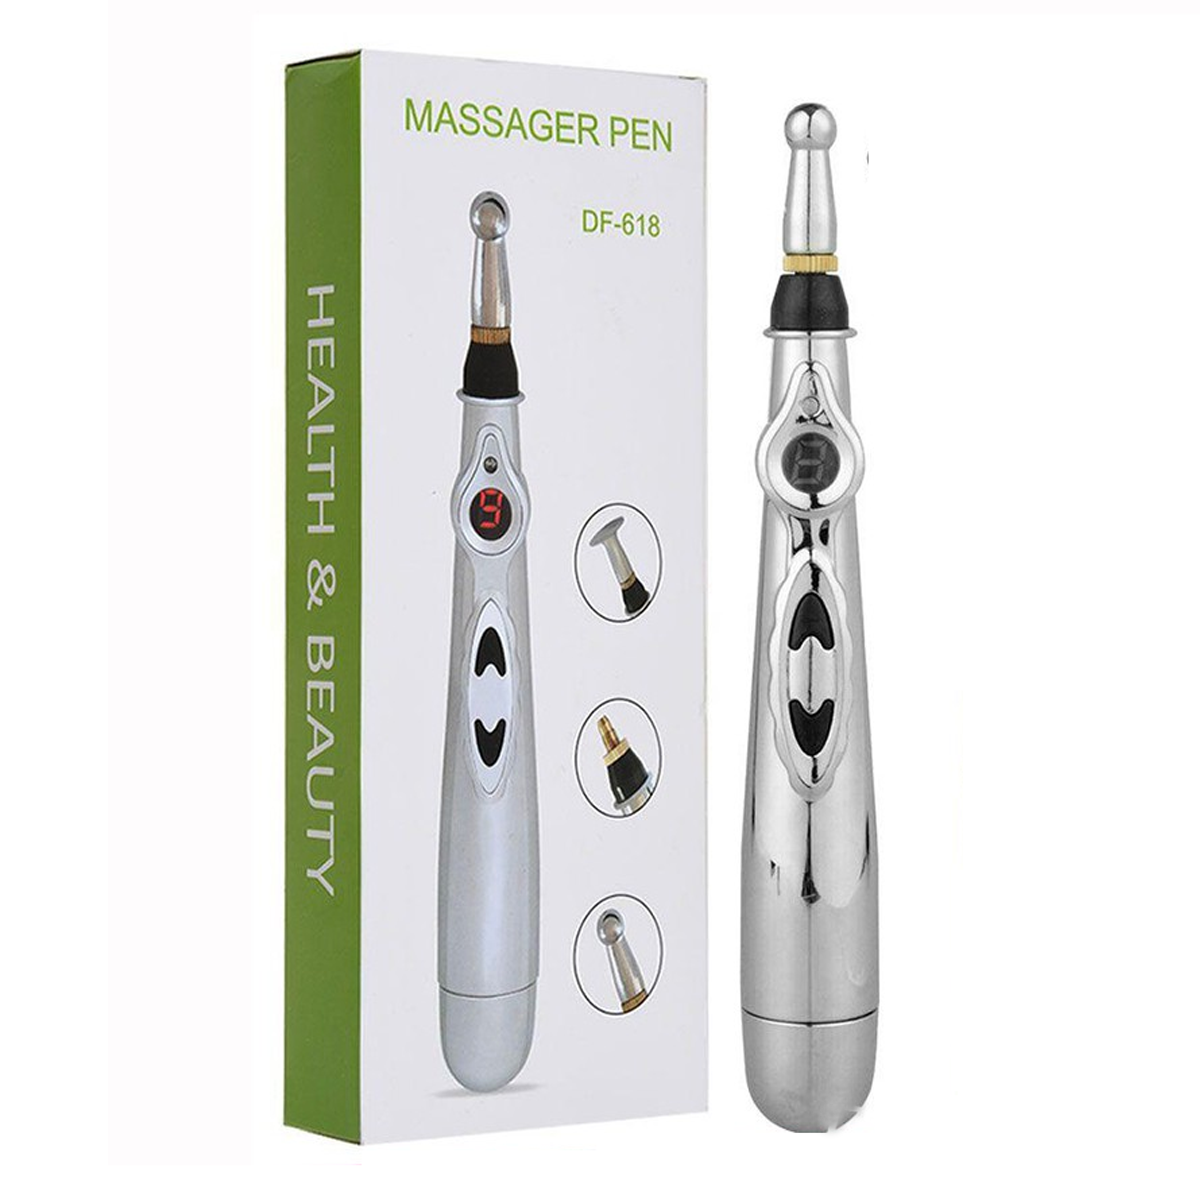 DF-618 Health And Beauty Pen Massager Theraphy